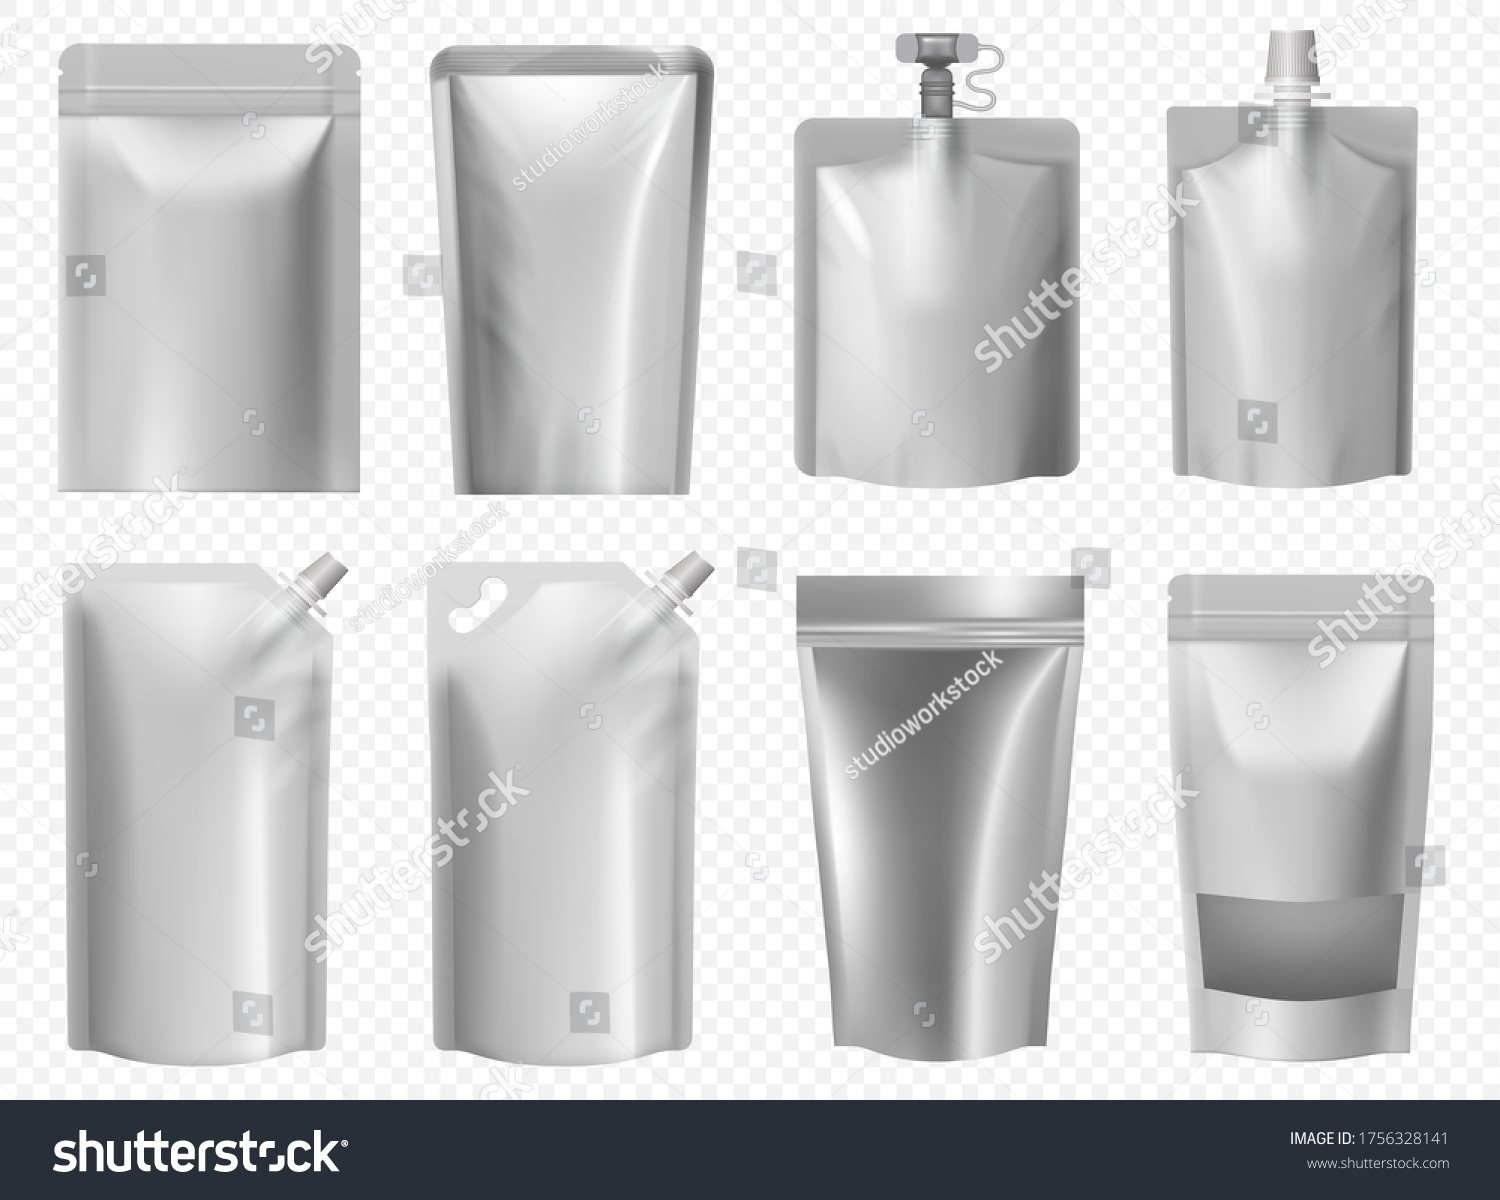 Download Doy Pack Template Foil Pouch Liquid Stock Vector Royalty Free 1756328141